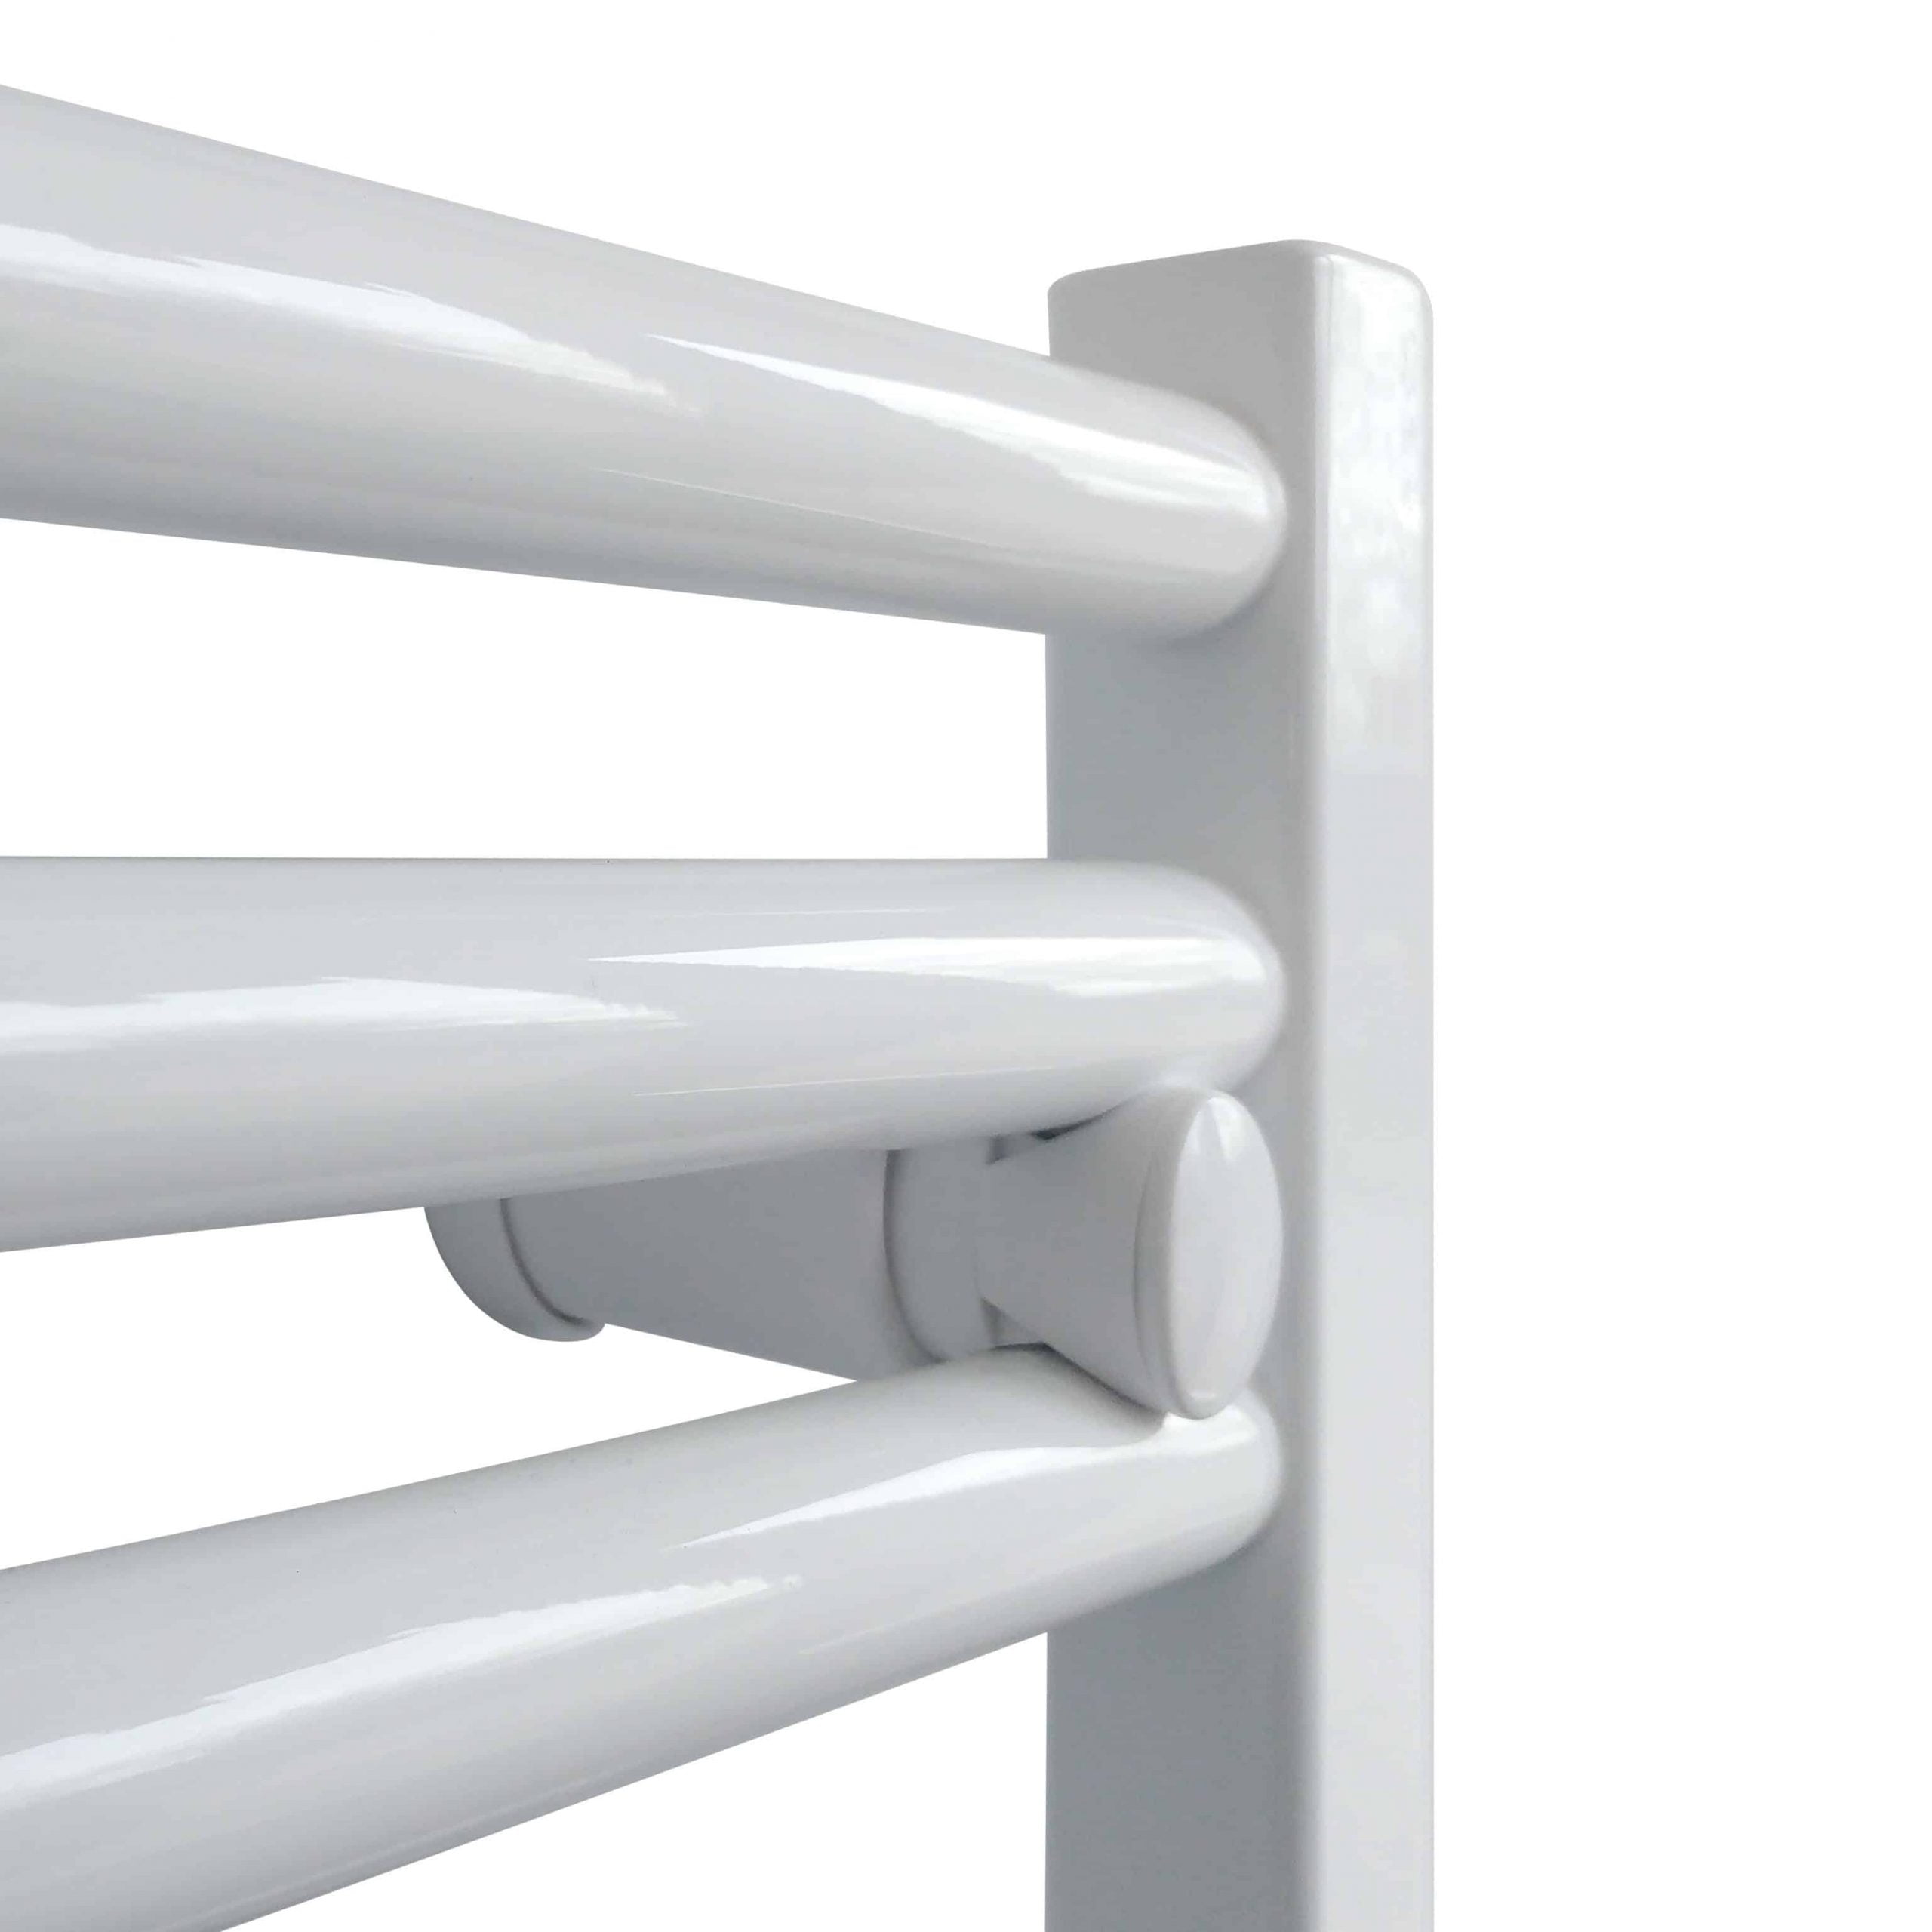 Aura 25 Curved White | Dual Fuel Towel Rail with Thermostat, Timer + WiFi Control